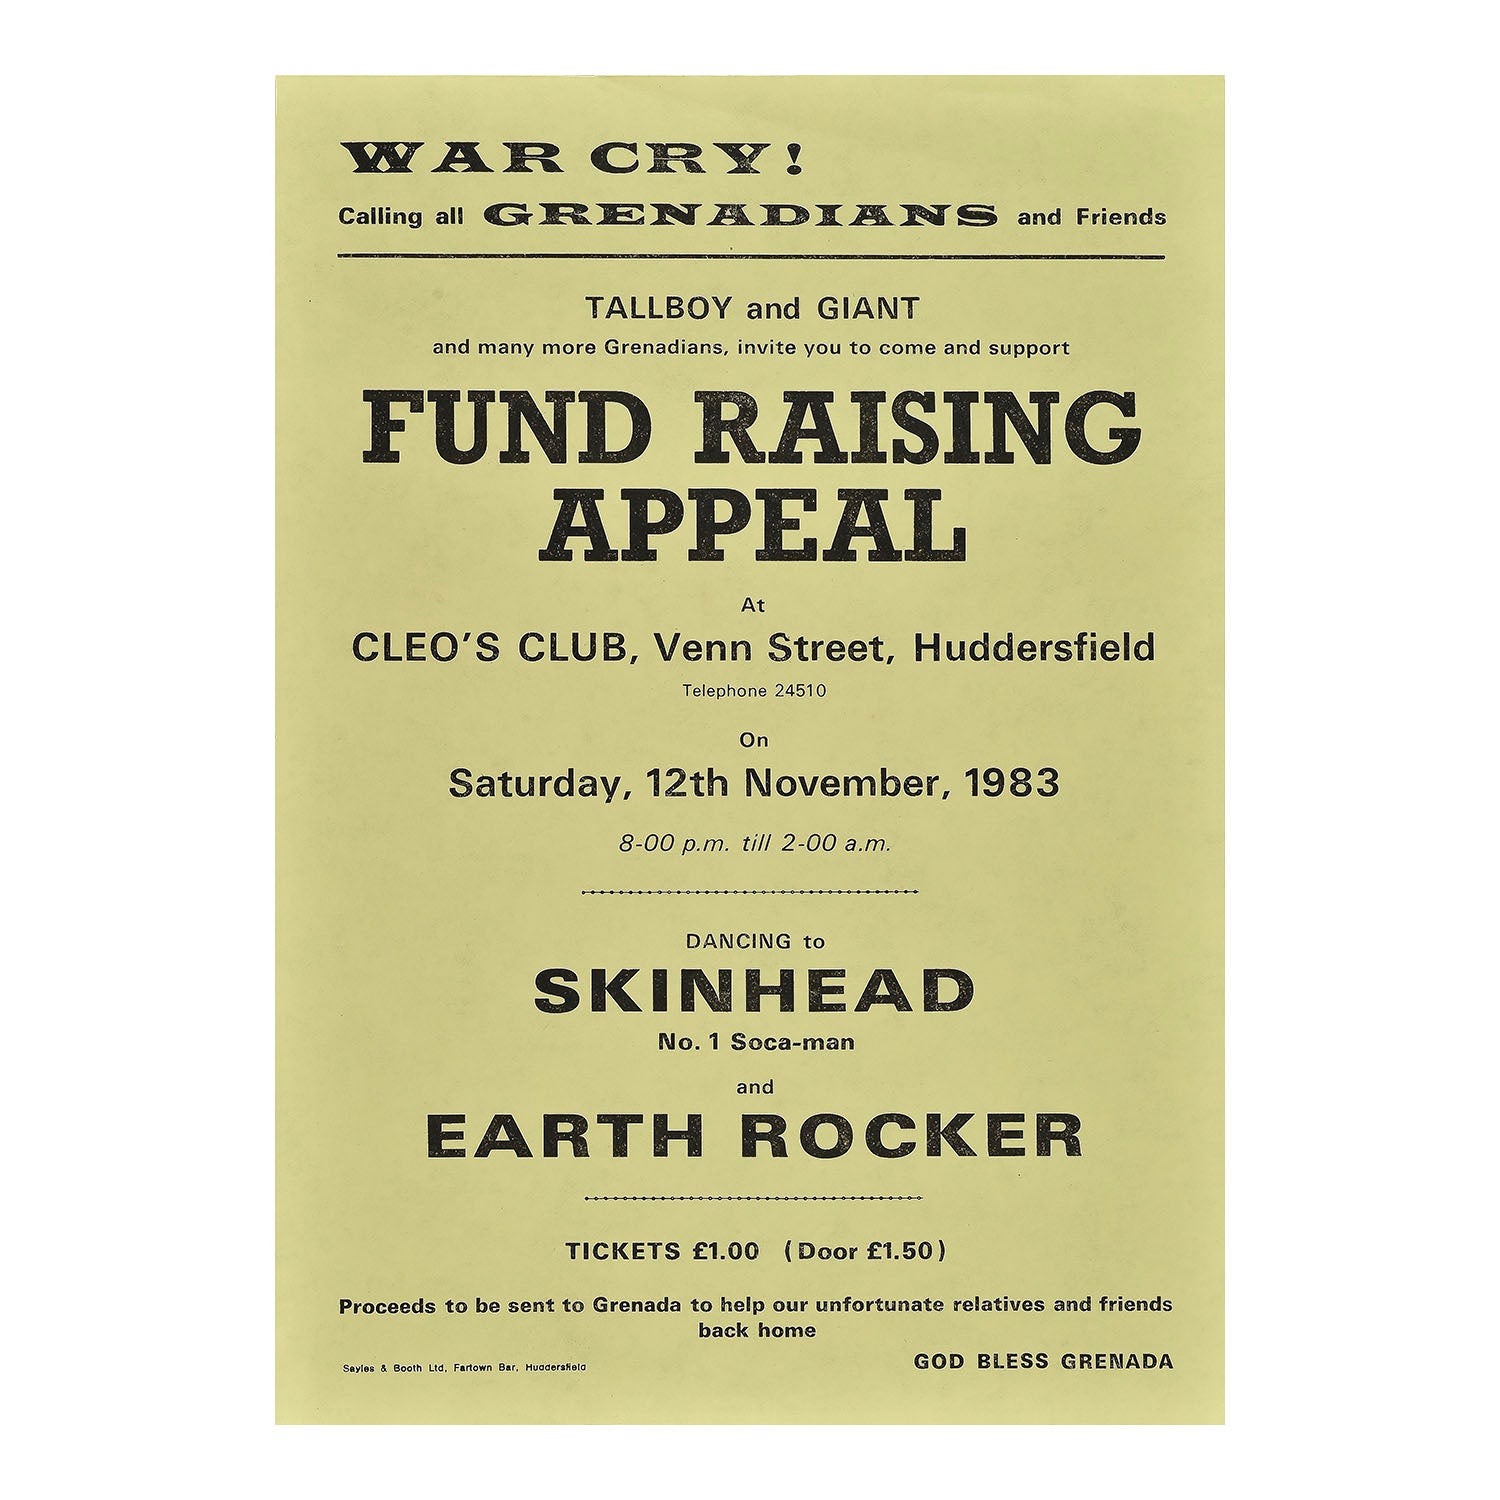 UK fundraising appeal poster for the people of Grenada following the US invasion of Grenada in October 1983. The poster promotes a special gig at Huddersfield’s Cleopatra Club, featuring local sound system bands Skinhead and Earth Rocker, 12 November 1983.